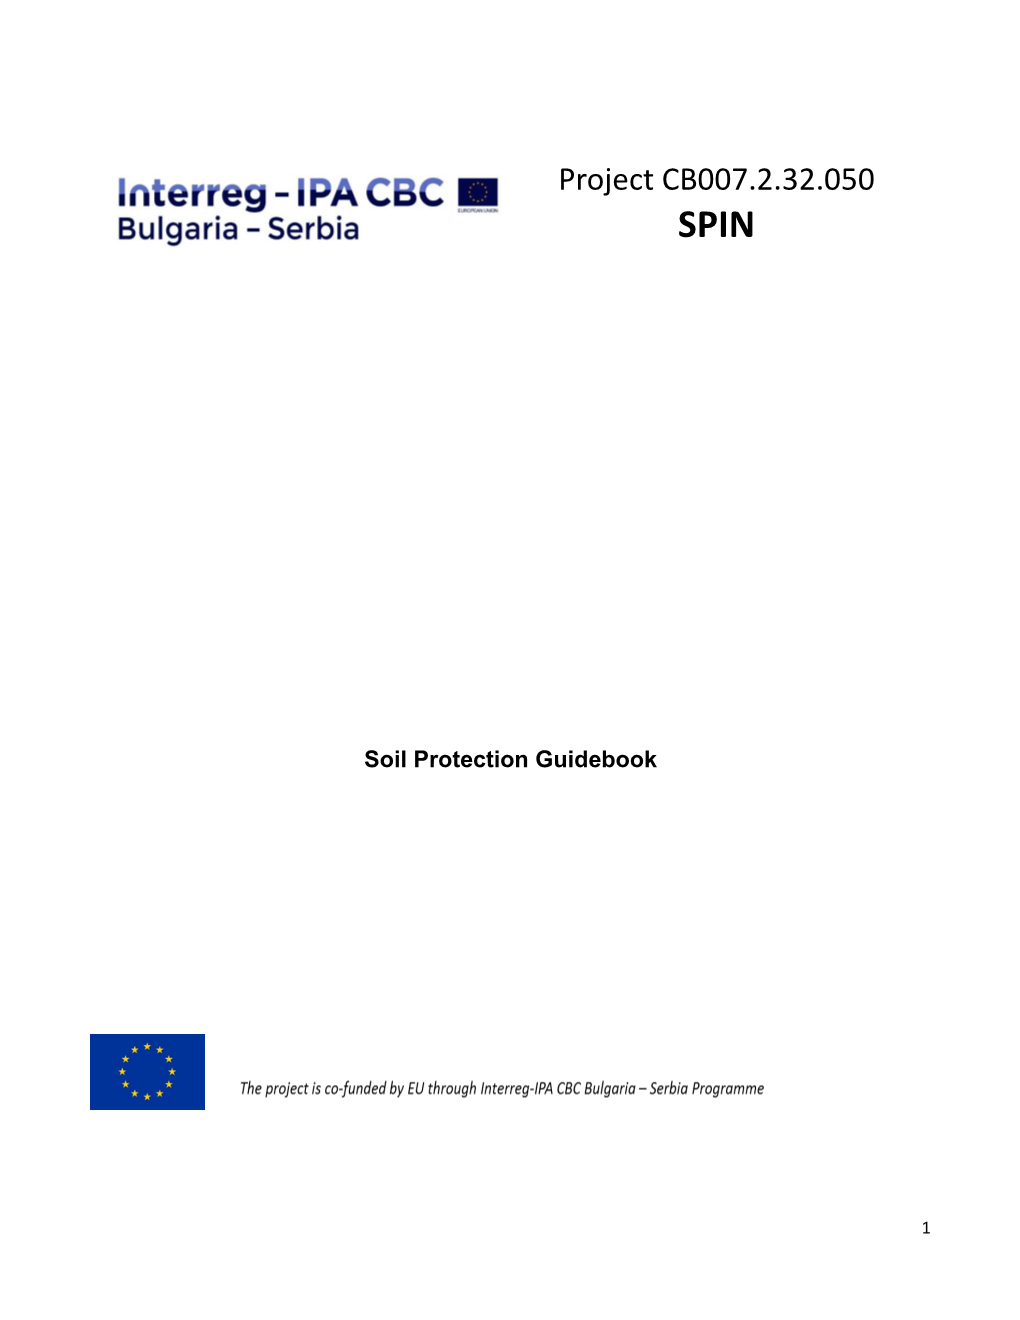 Soil Protection Guidebook